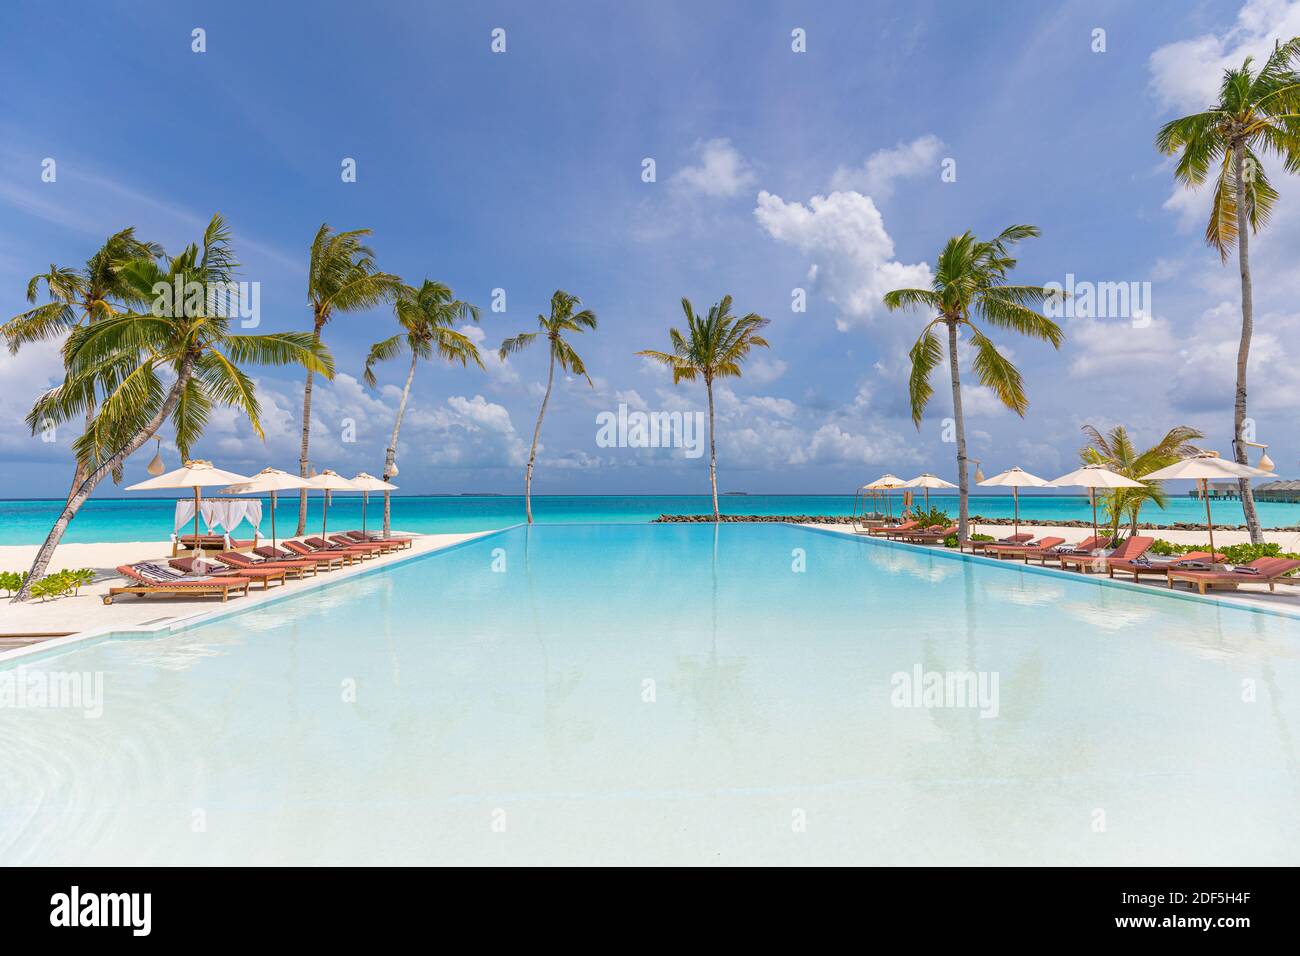 Luxury swimming pool a tropical resort. The edge luxurious swimming pool with relax deckchairs beds on the beach, infinity sea view. Inspire resort Stock Photo